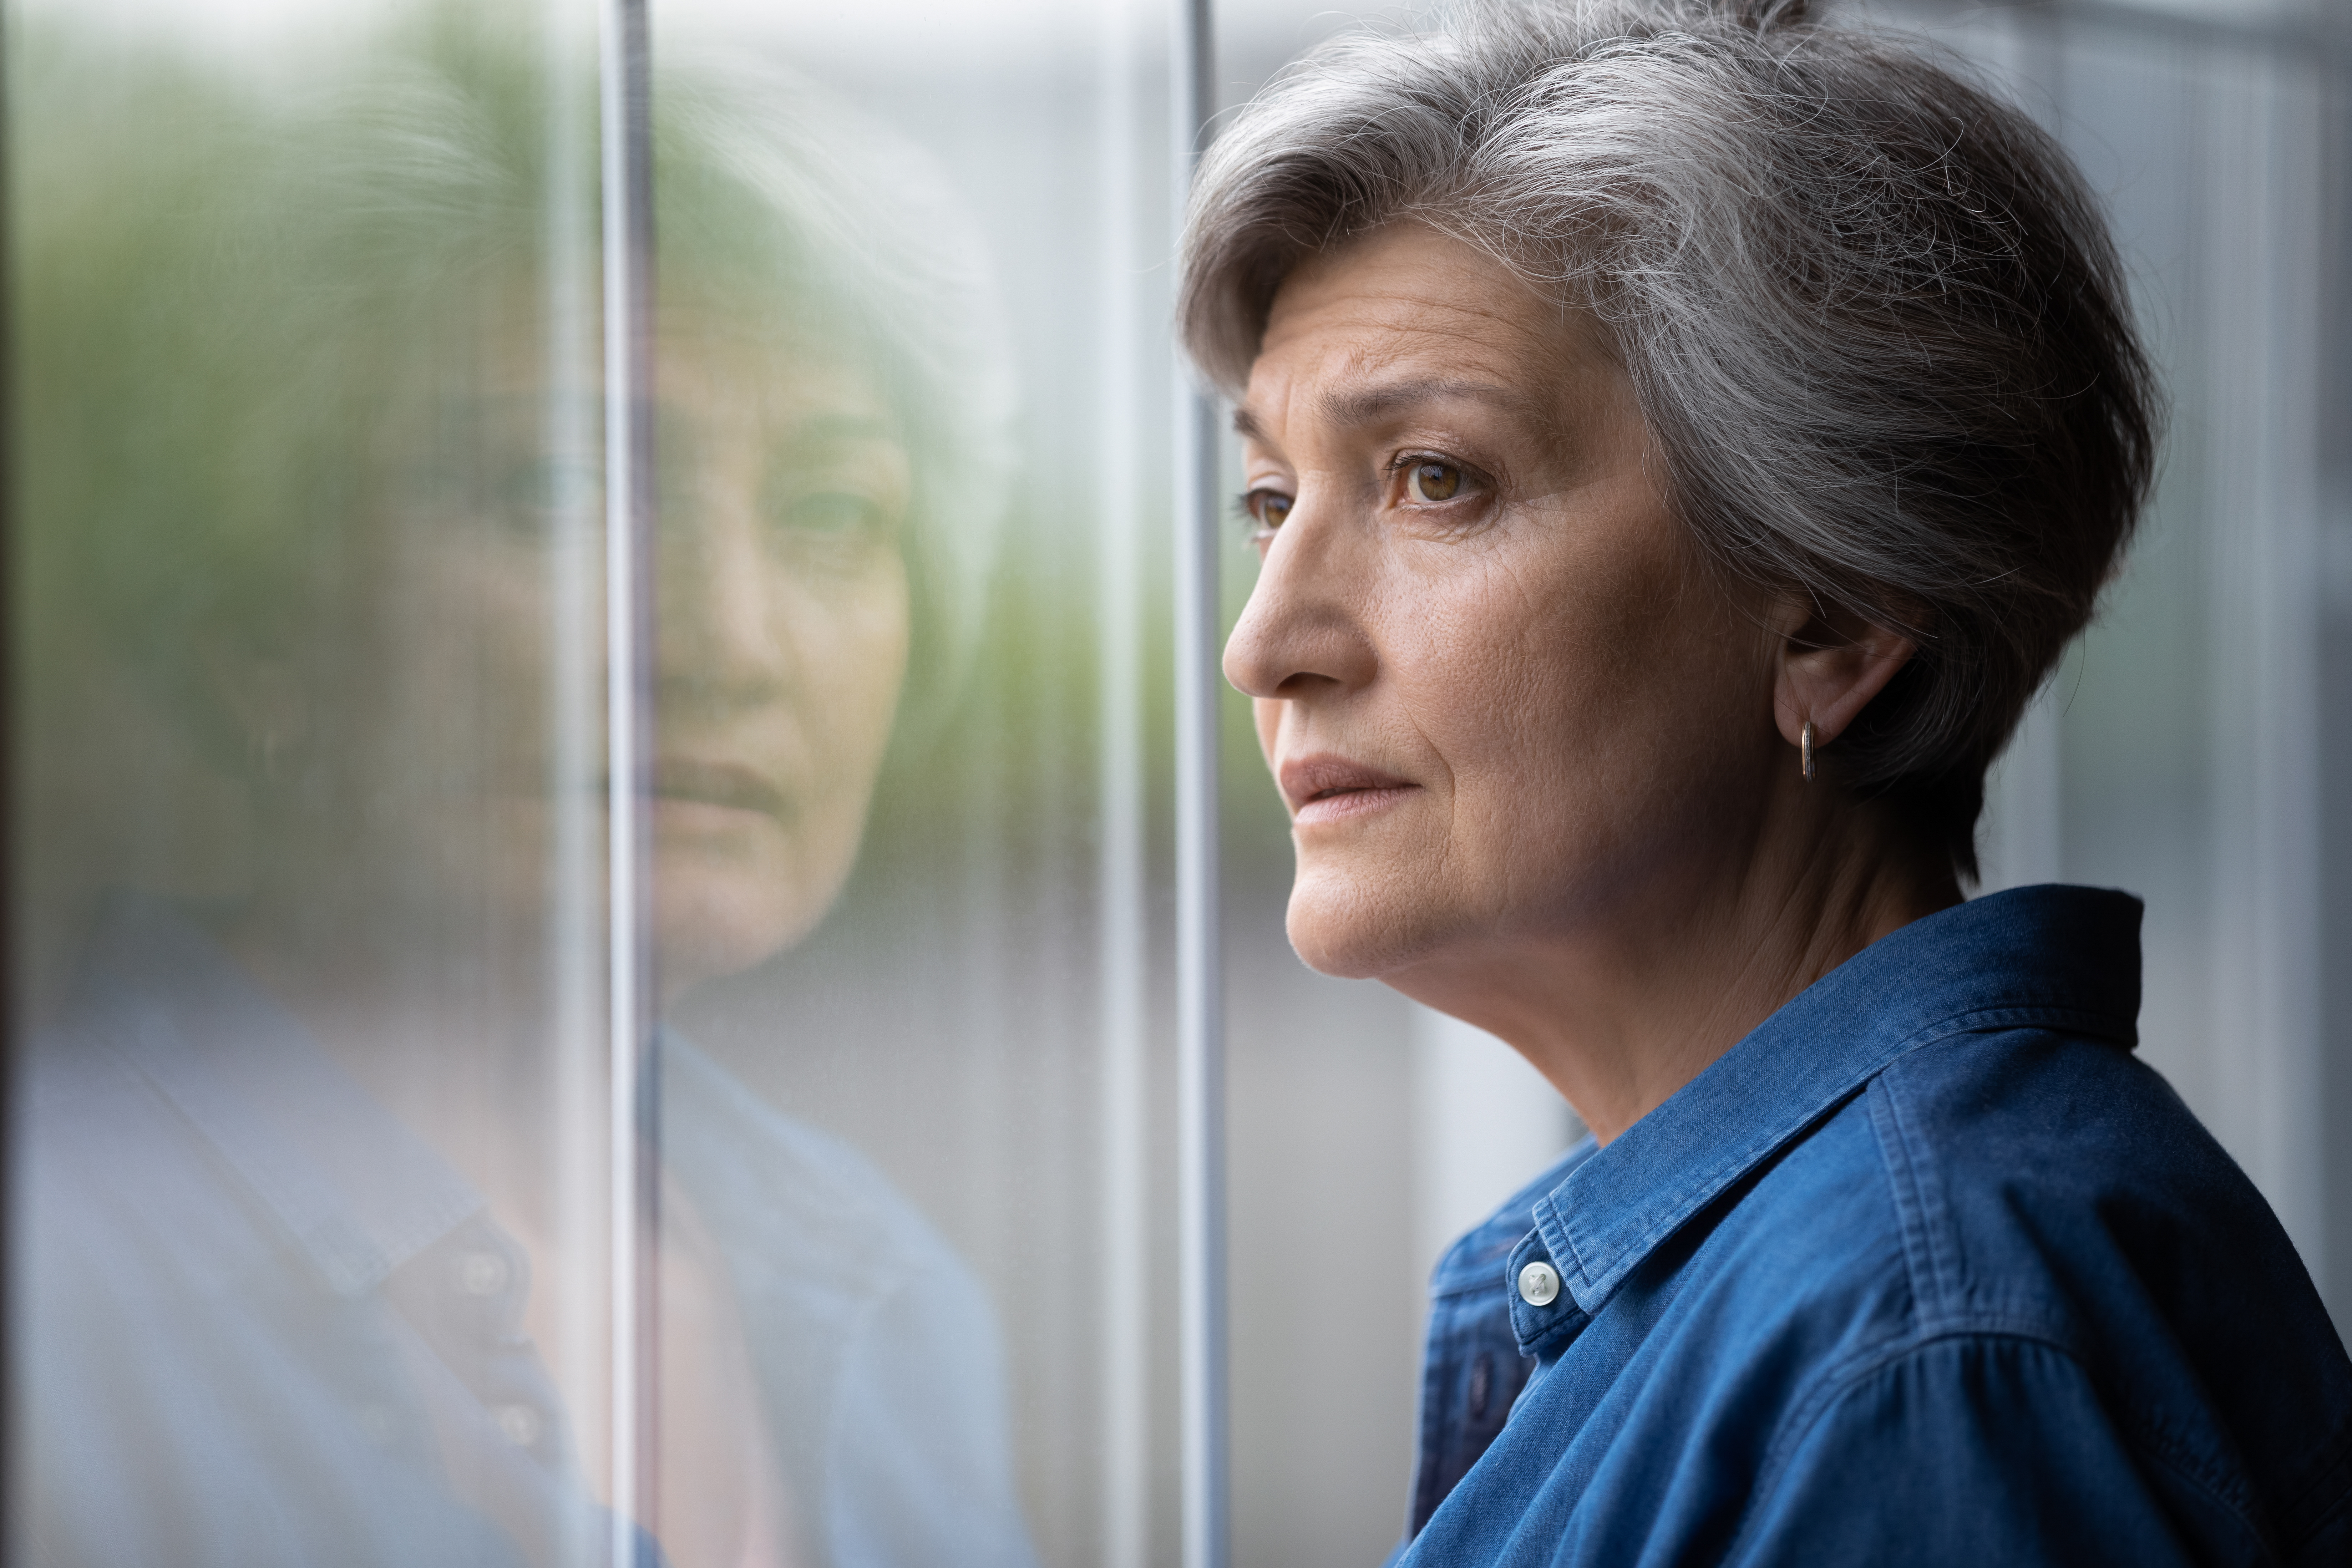 An upset and lonely senior woman looking outside from the window | Source: Shutterstock